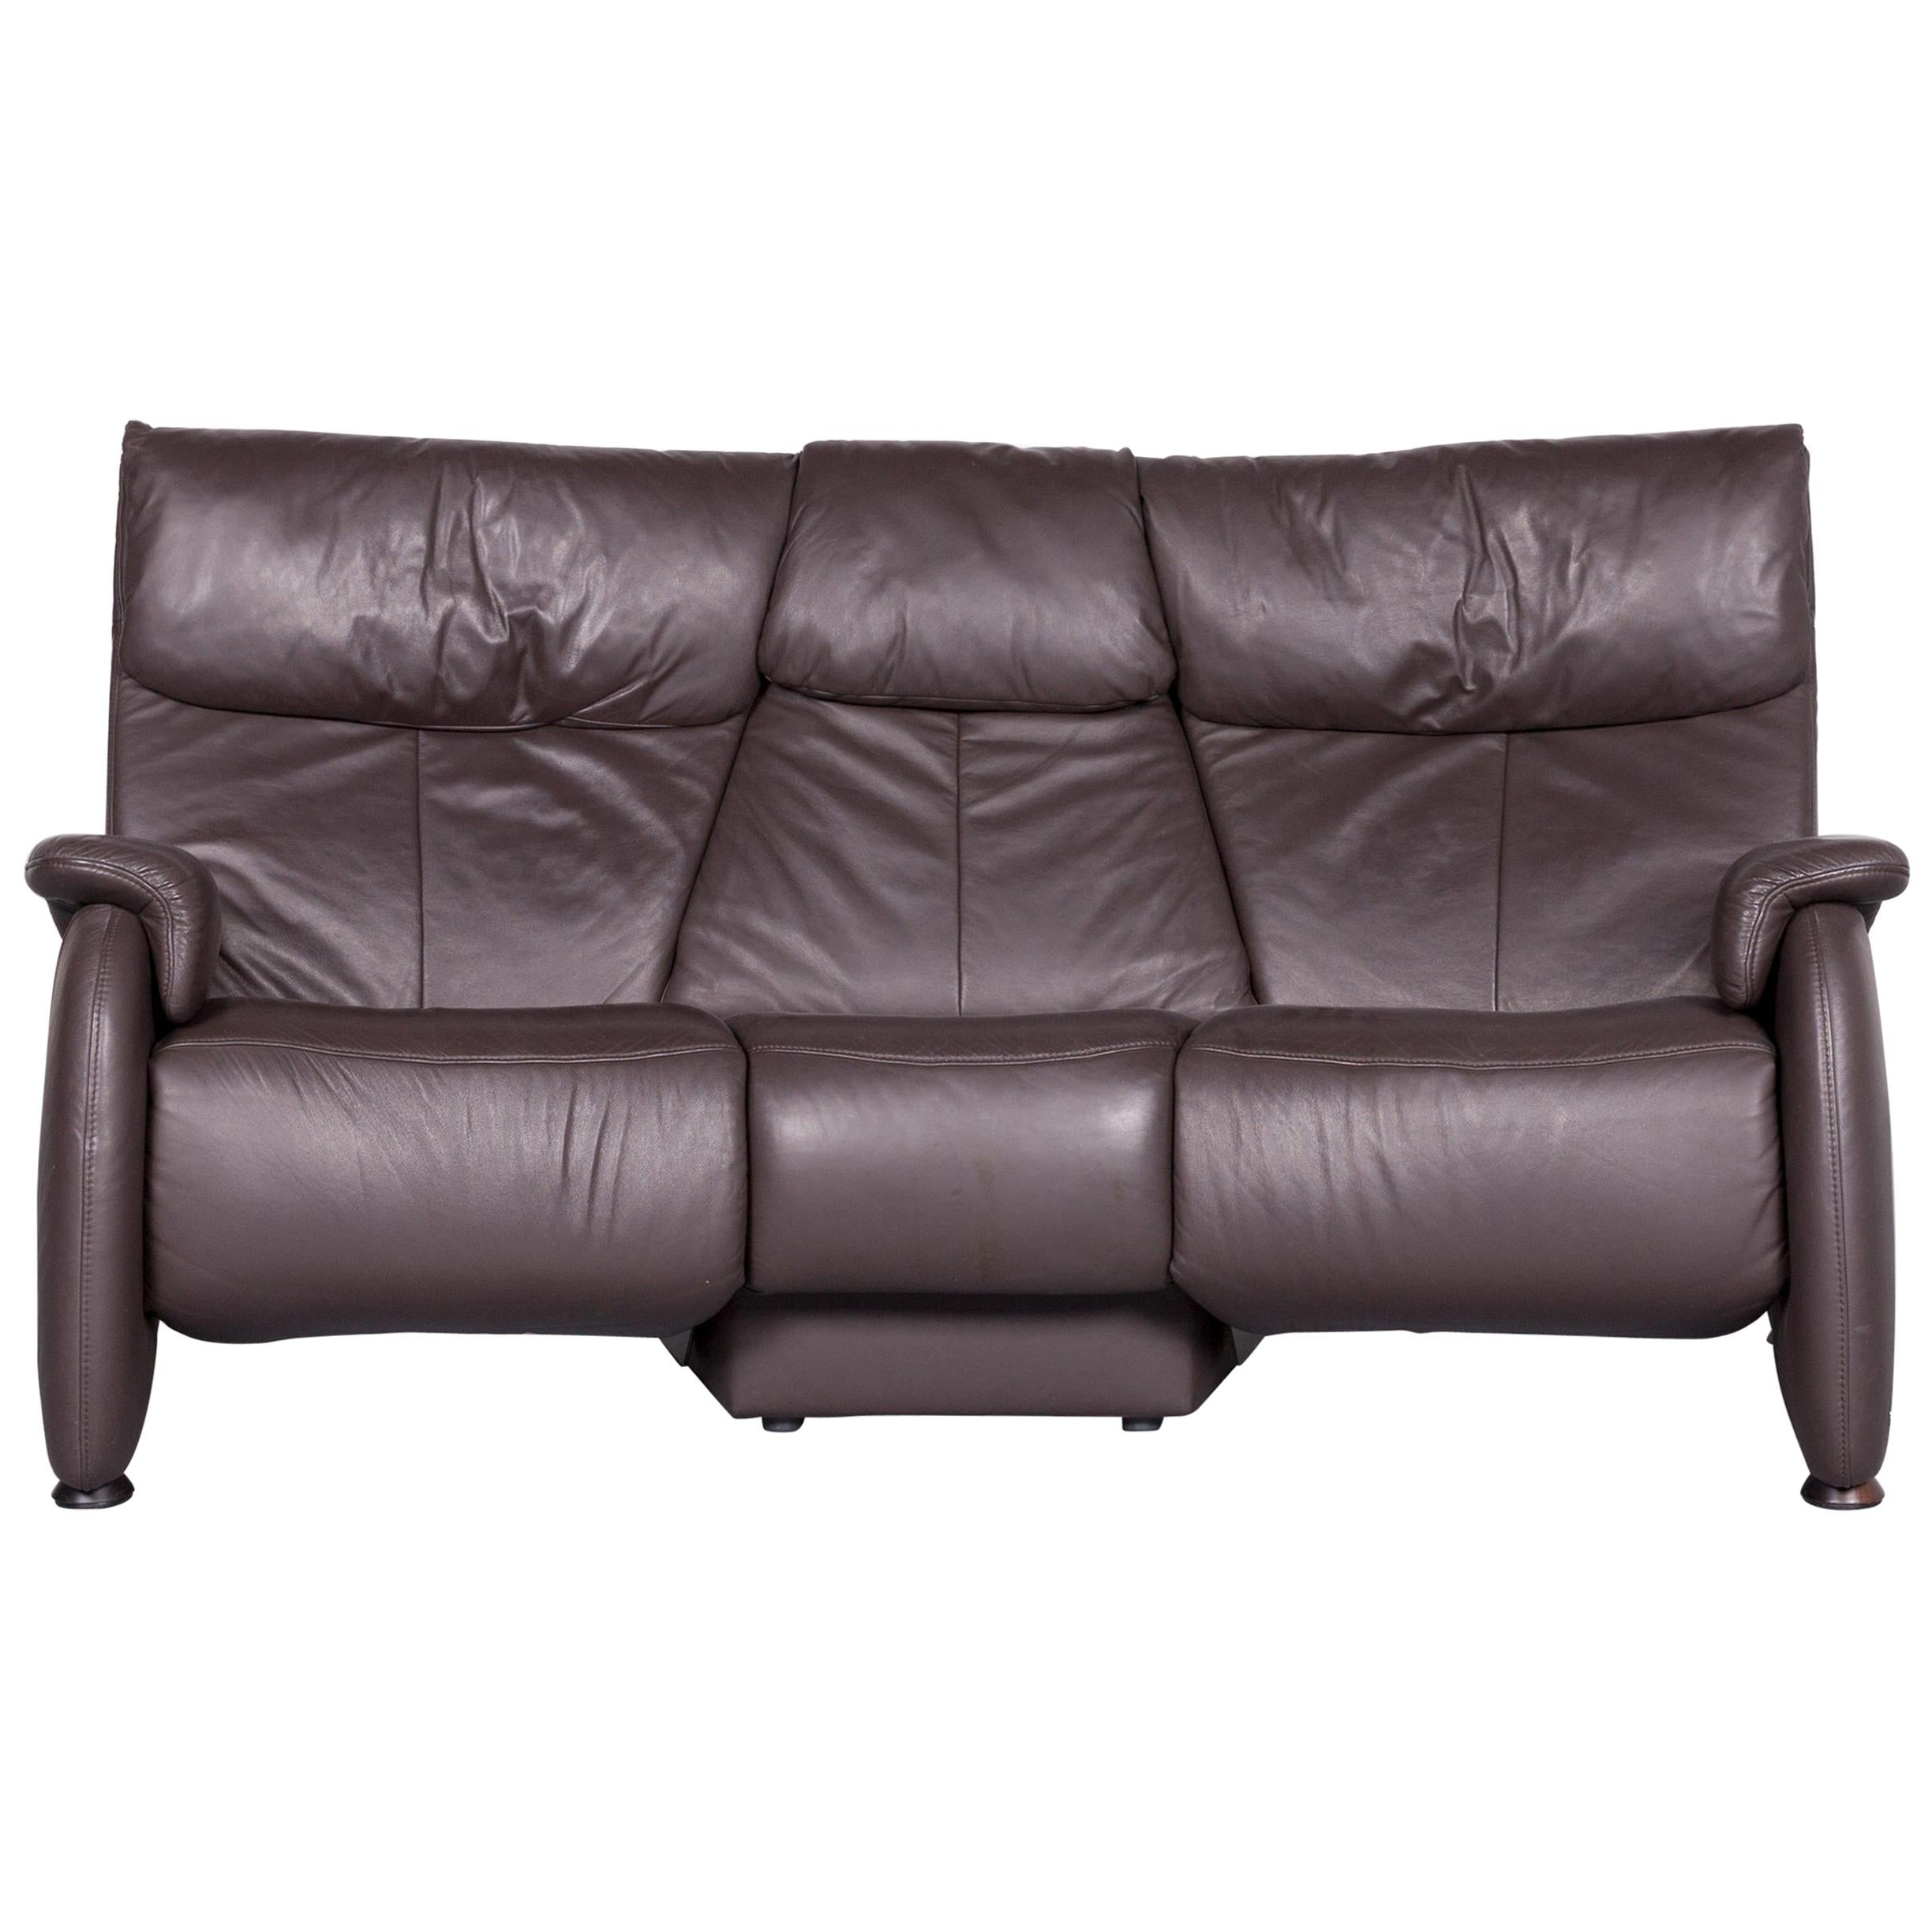 Himolla Trapez Sofa Brown Leather Three-Seat Couch Recliner Function For Sale